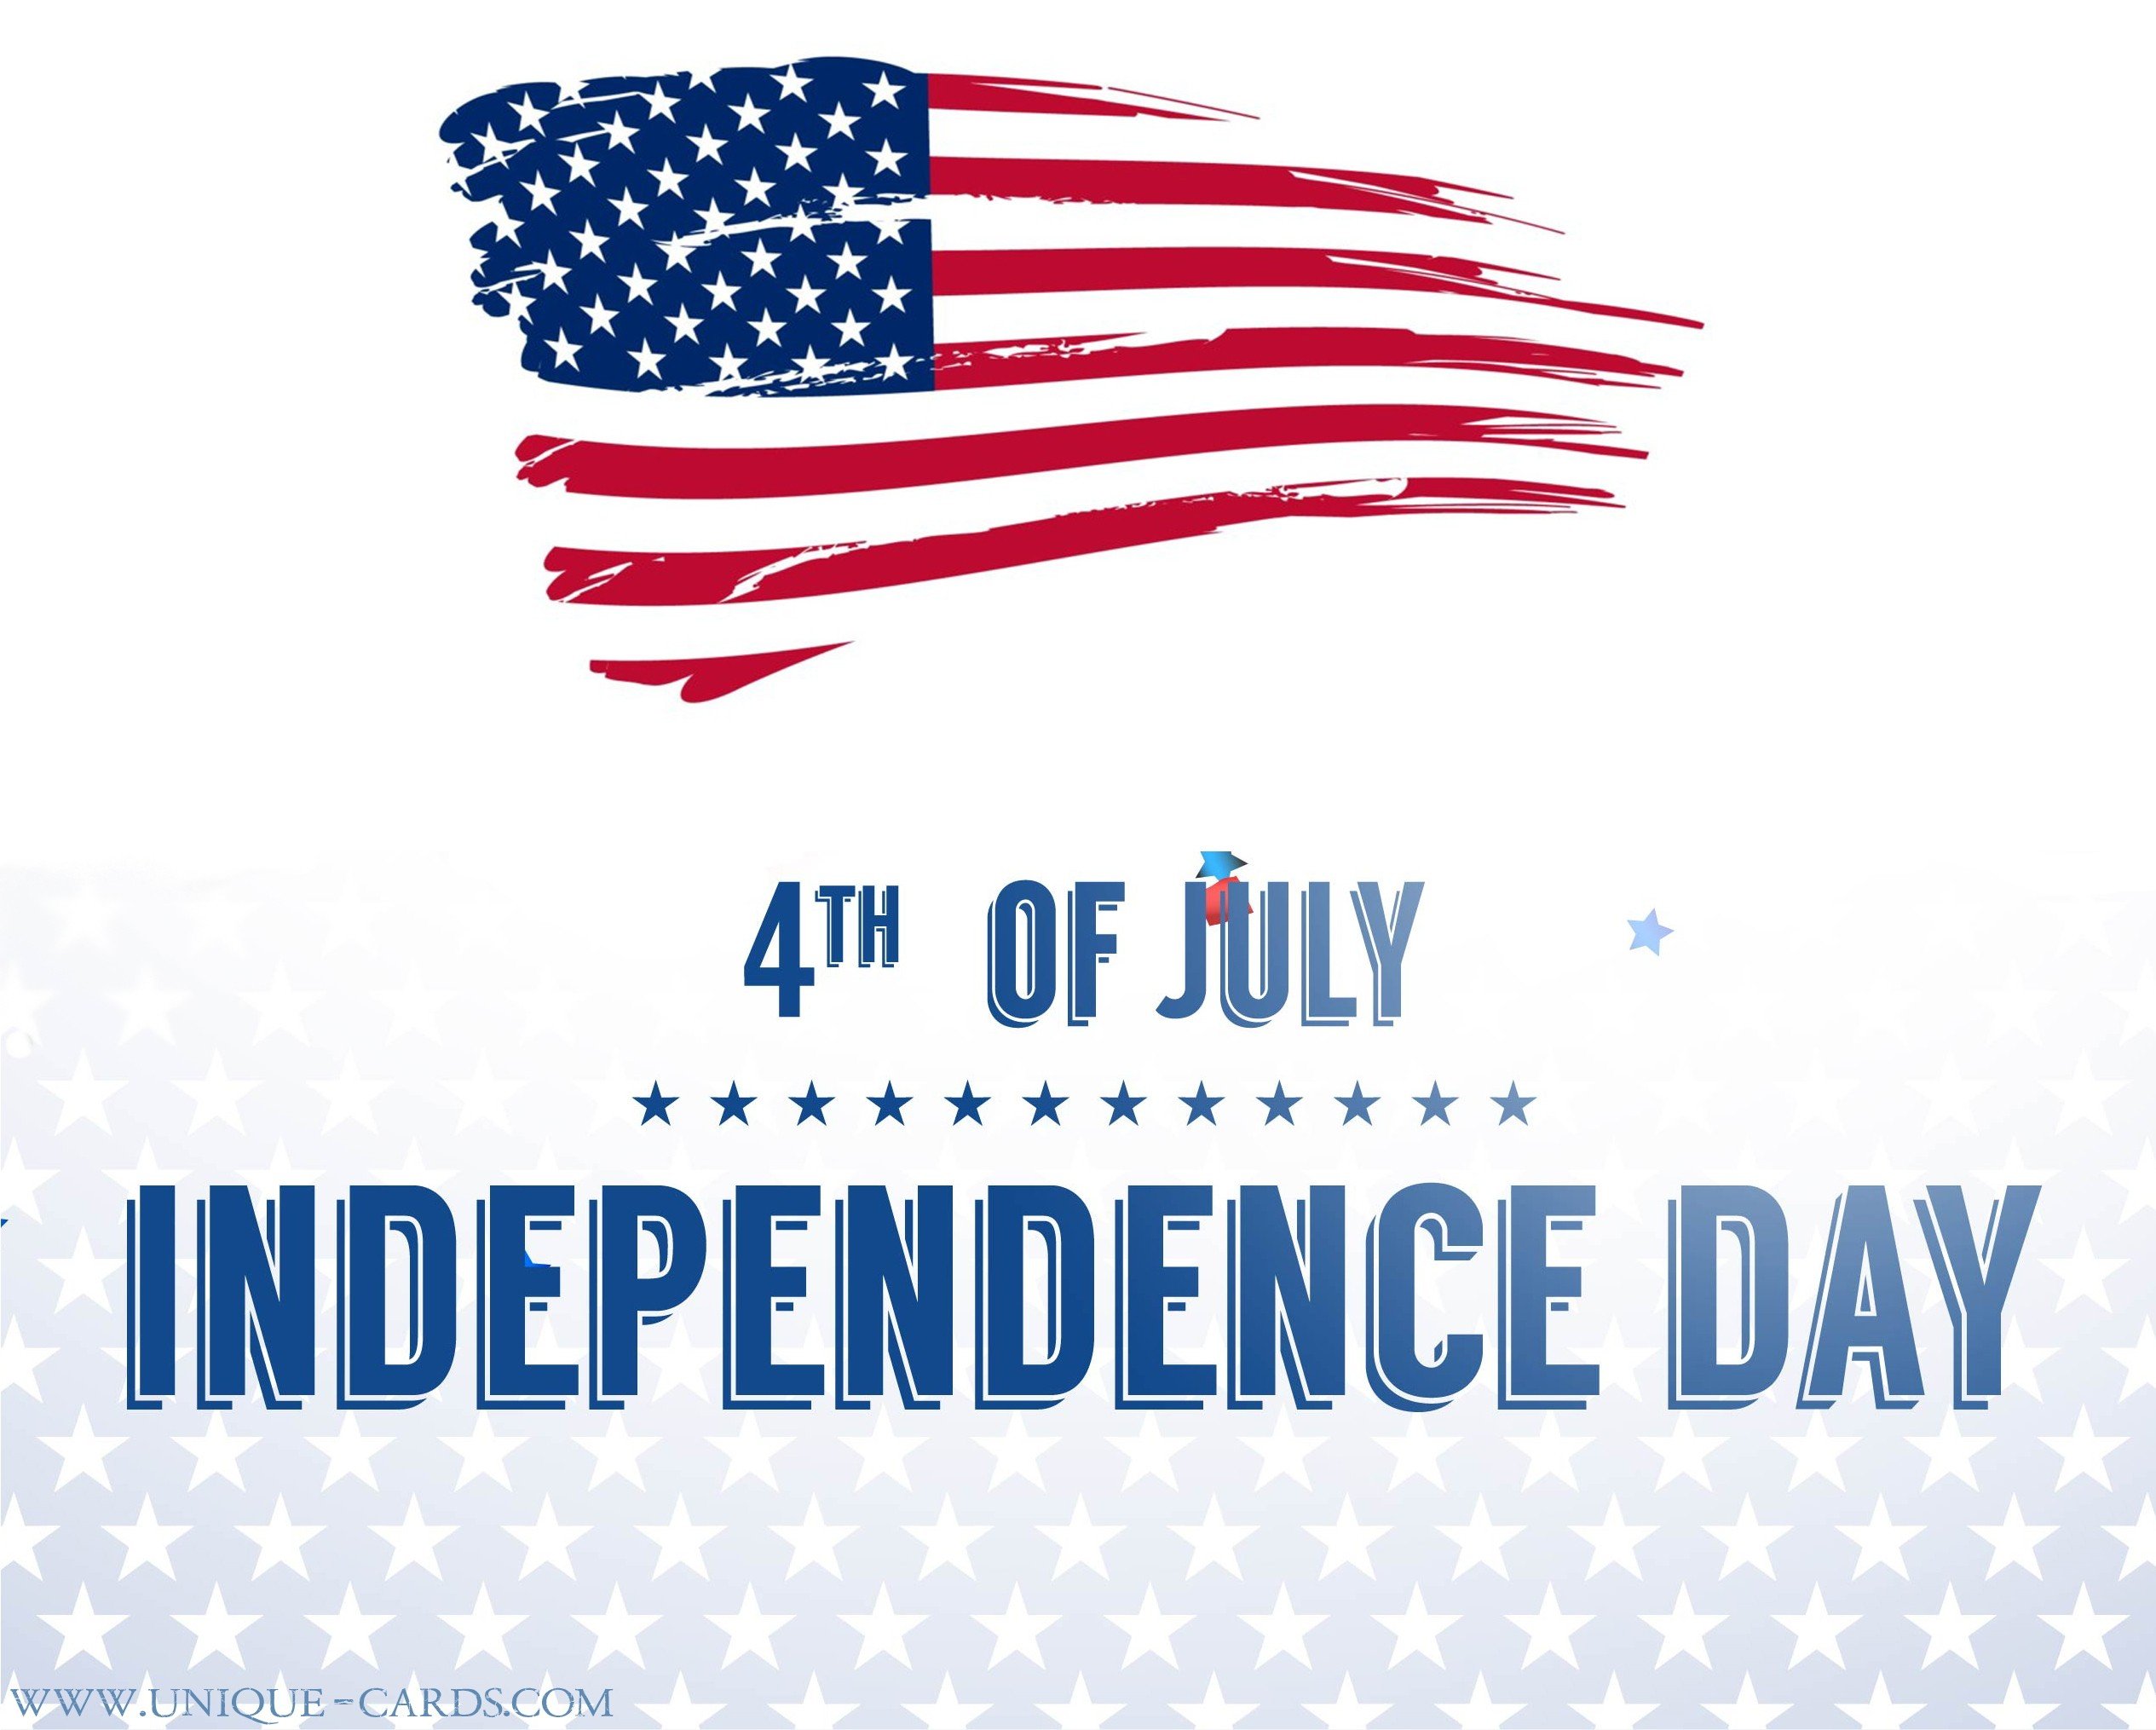 4th, July, Independence, Day, Usa, America, Holiday, 1ijuly, United, States, Flag, Poster Wallpaper